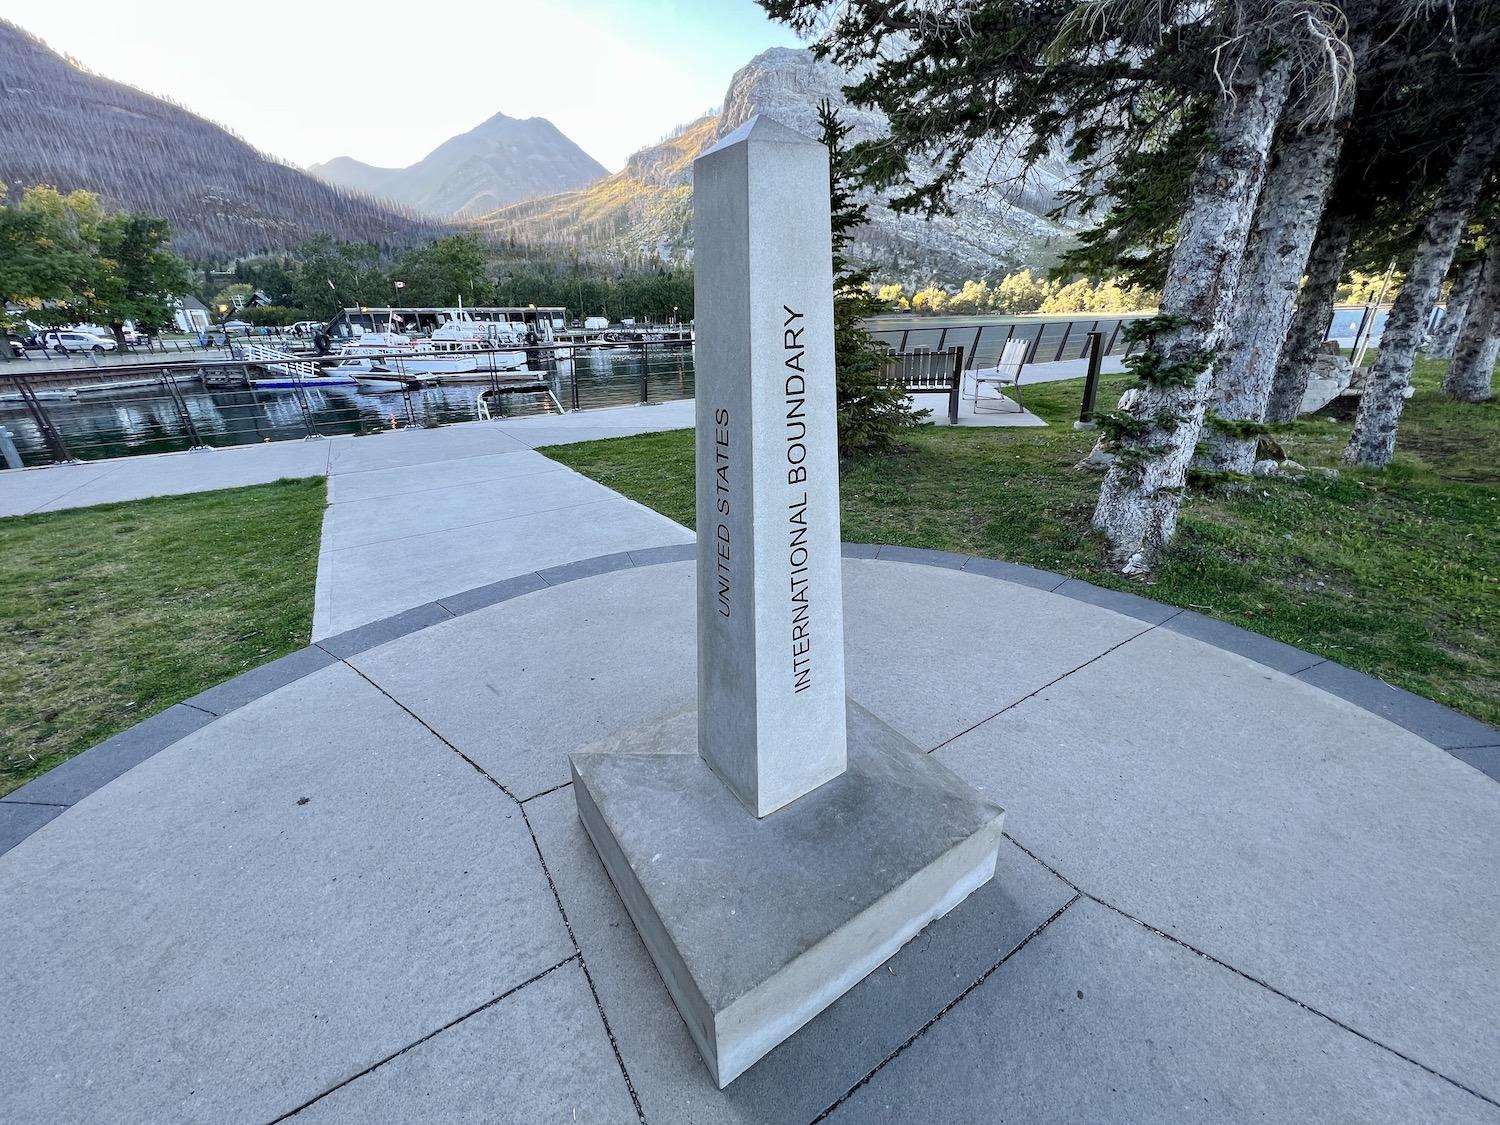 For those who don't hike to the real border in the wilderness, a ceremonial international boundary marker stands in Waterton's Peace Park Plaza.